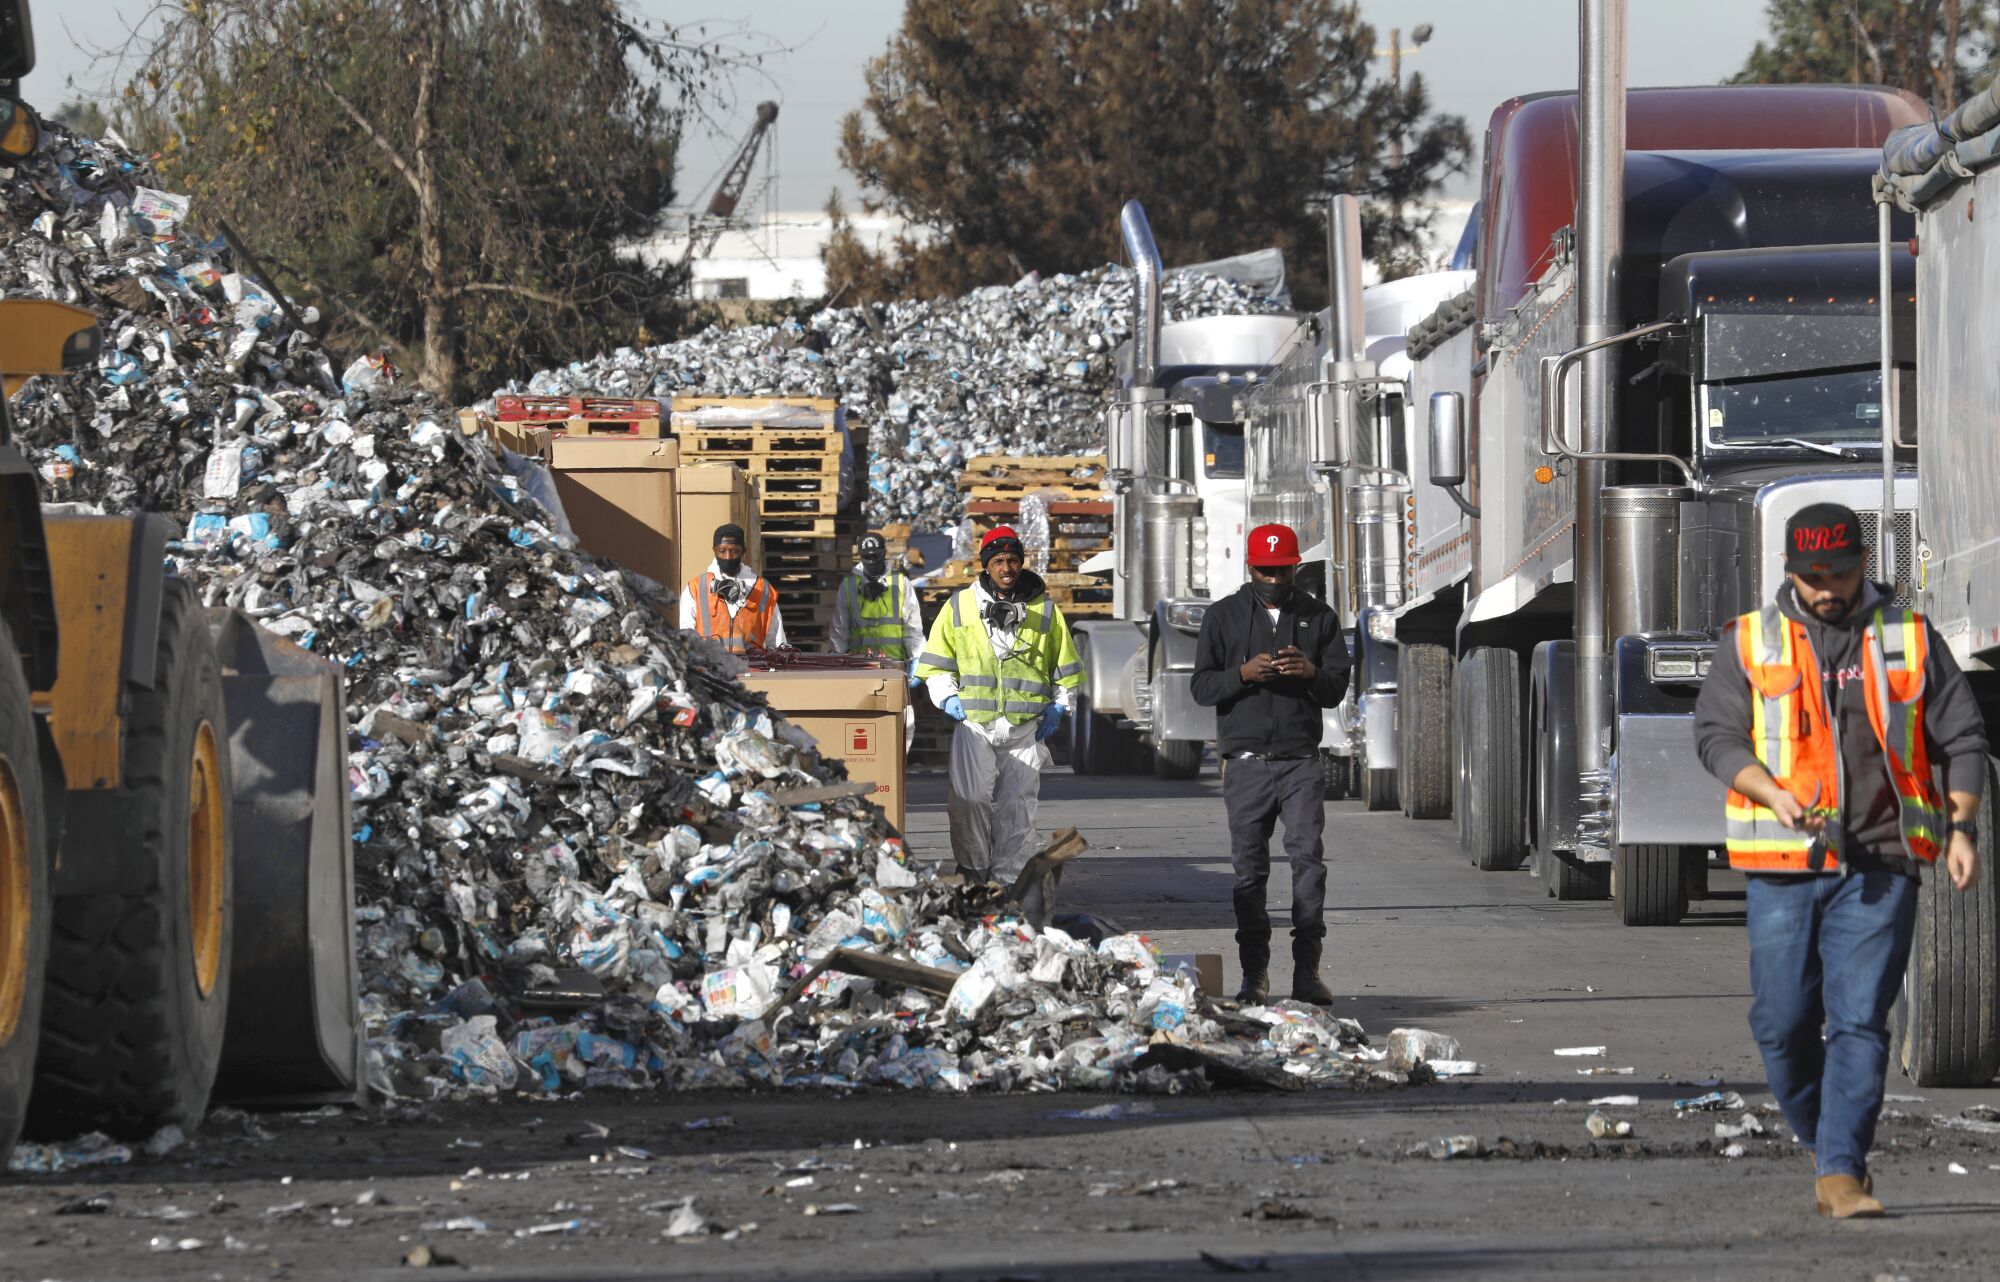 Workers hired to clean millions of pounds of charred hand sanitizer products from a warehouse fire in Carson on Sept. 30